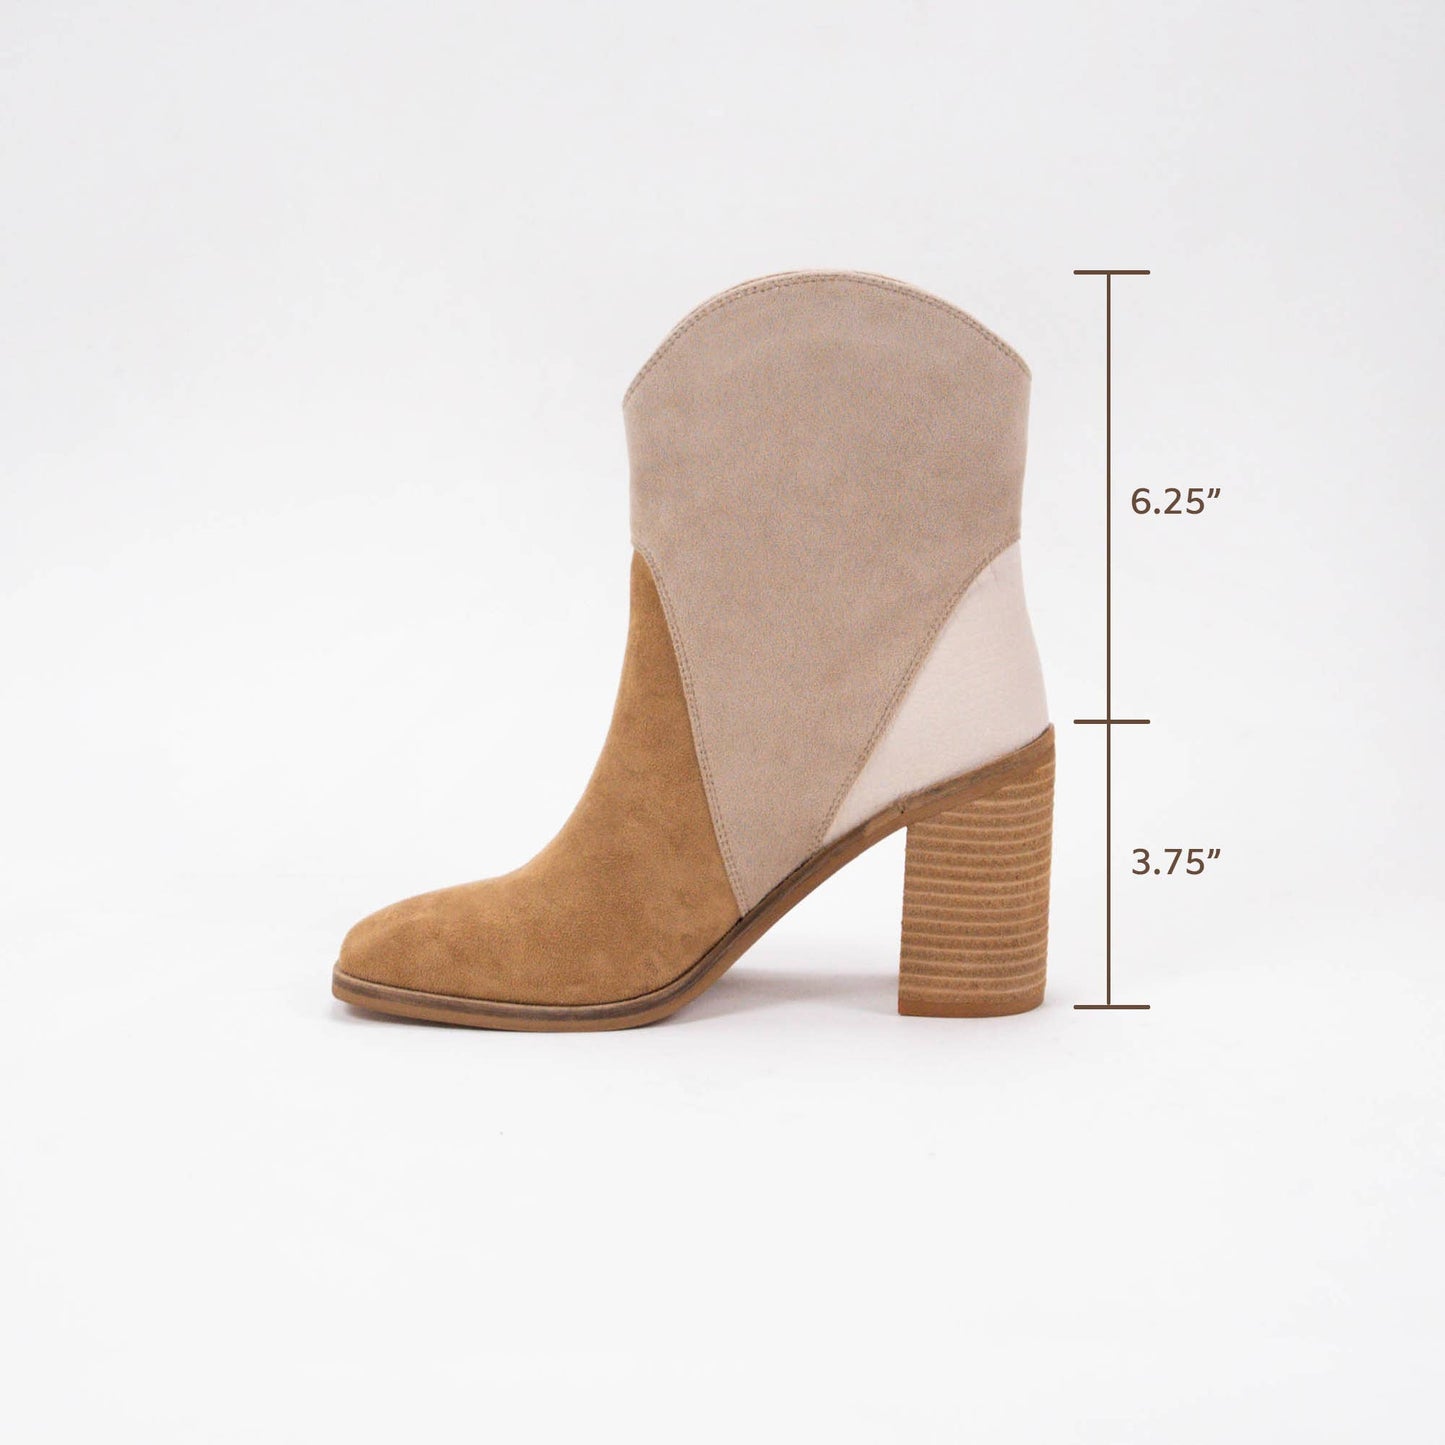 TRI-TONE BOOTIE WITH SQUARE TOE: CAMEL/TAUPE/BEIGE CROC